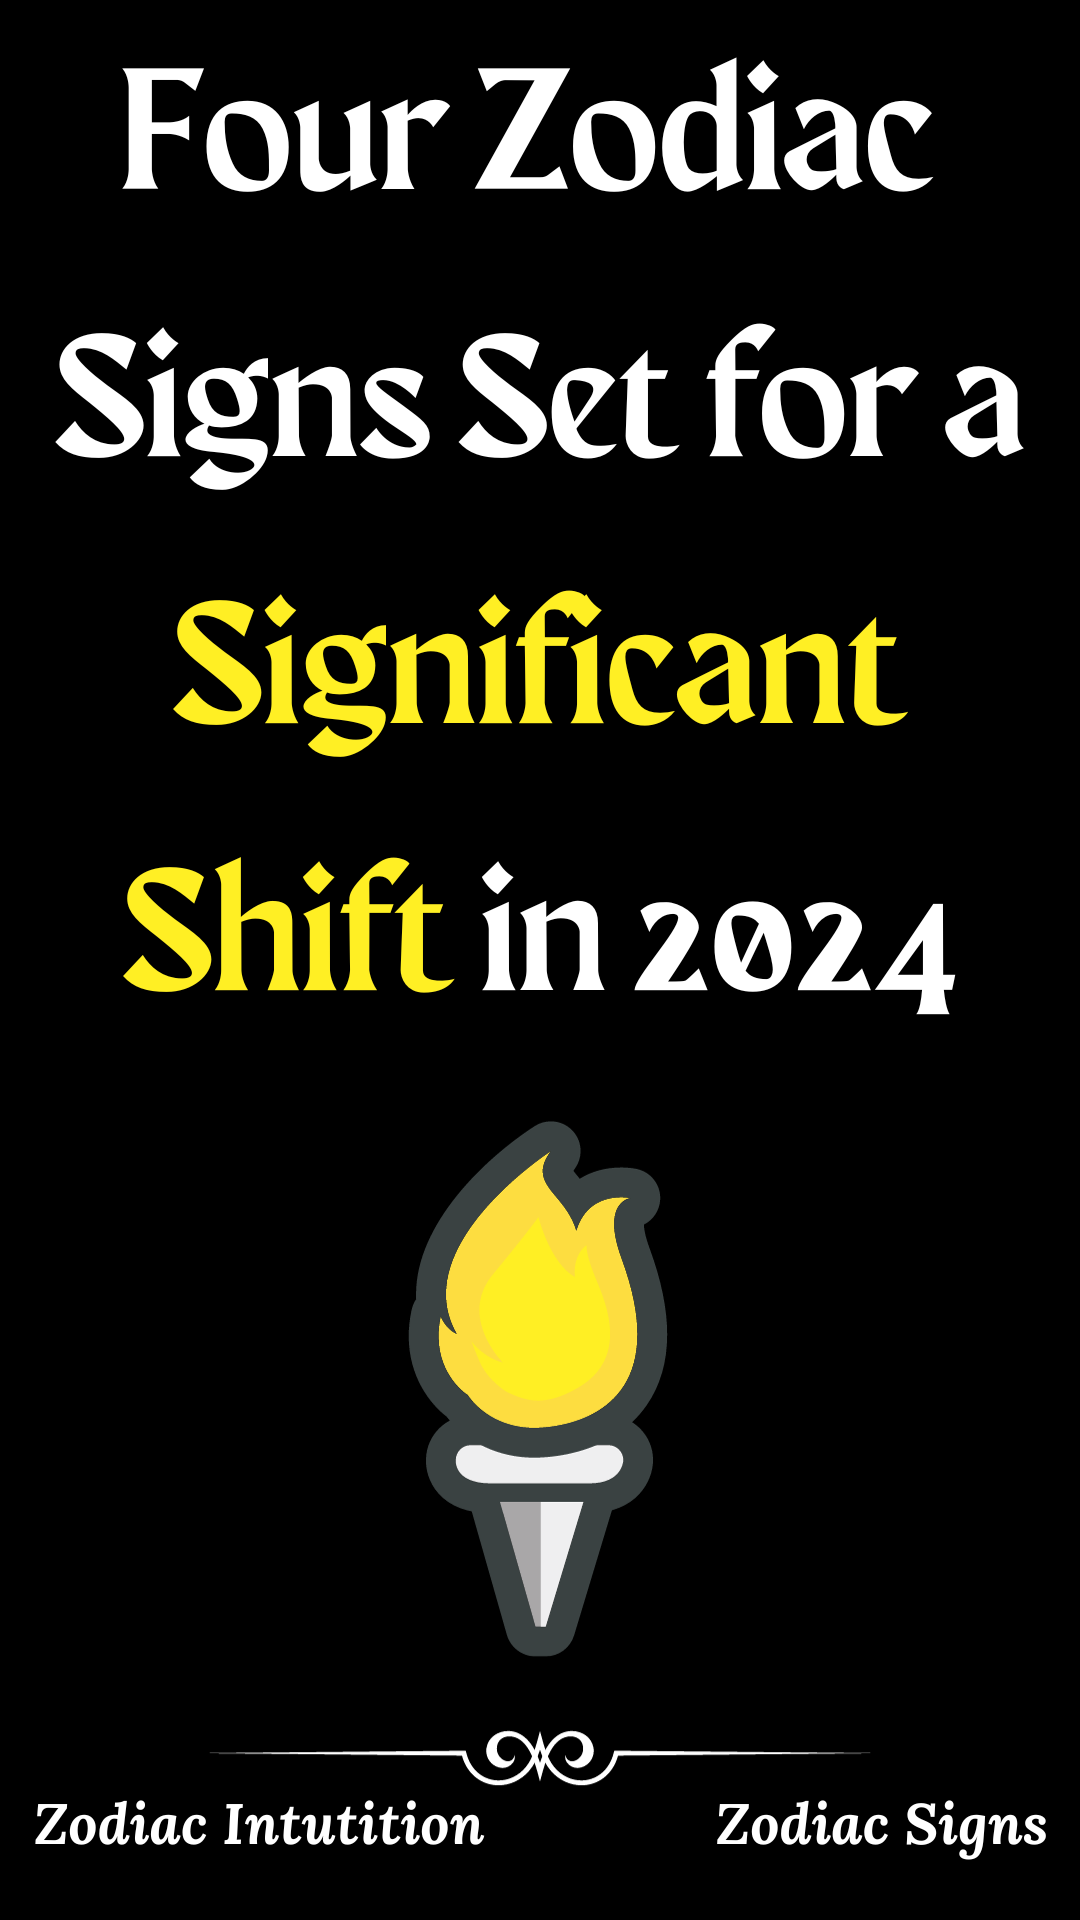 Four Zodiac Signs Set for a Significant Shift in 2024